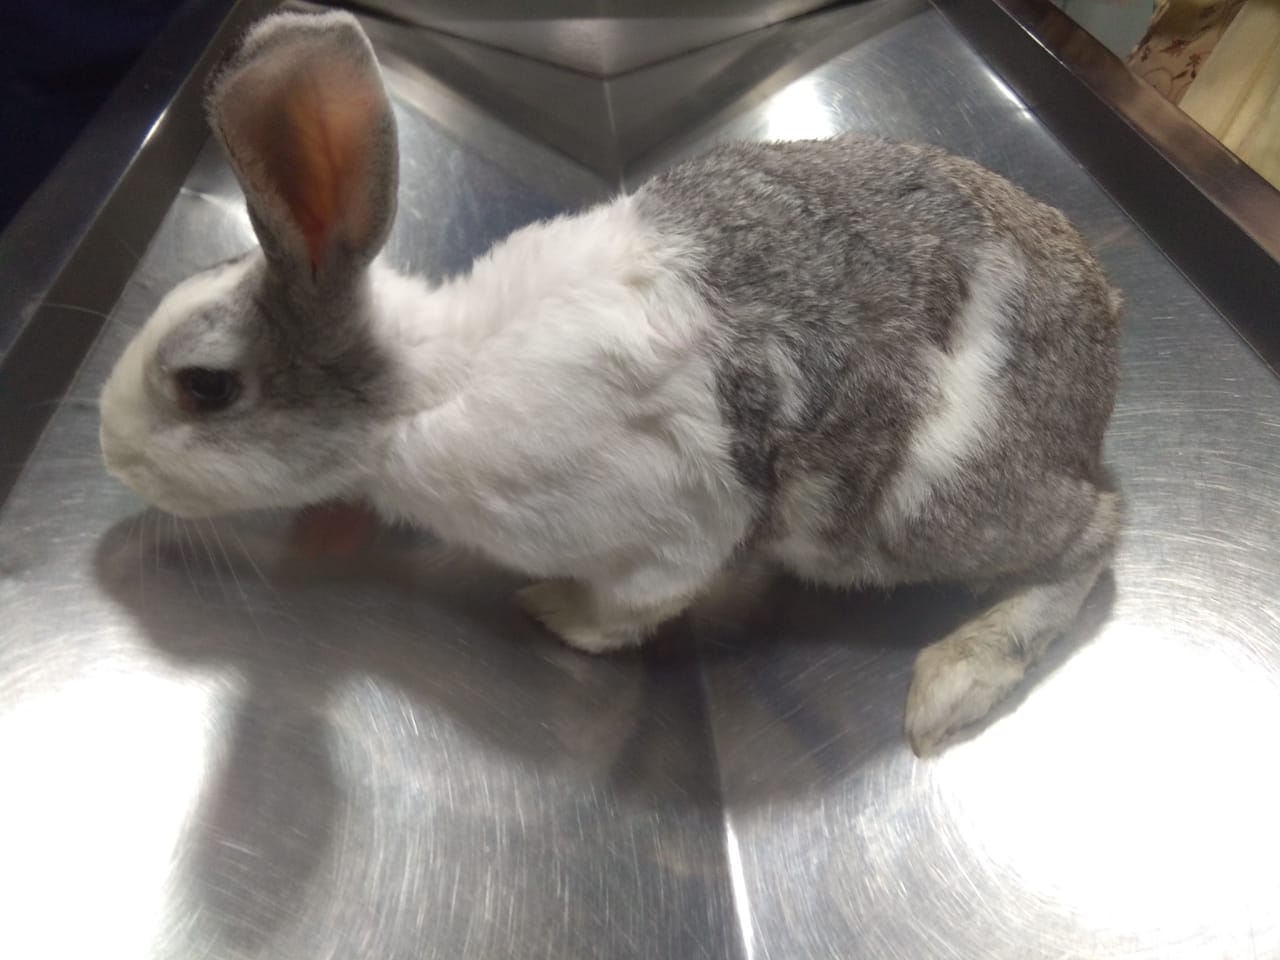 Veterinarians removed 500 gms tumor from rabbit’s chest